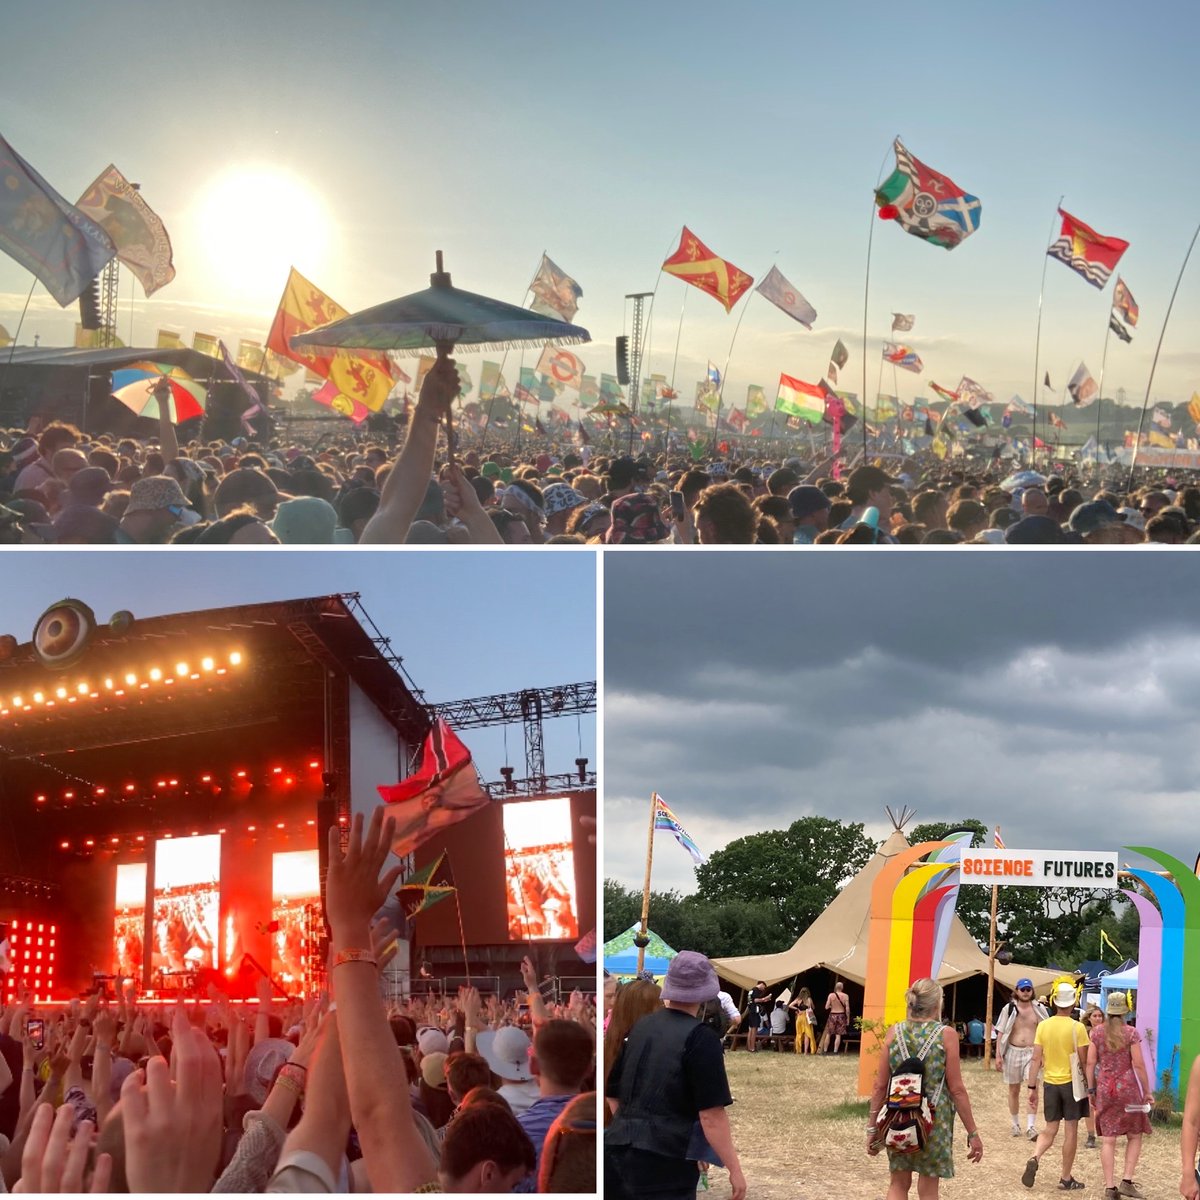 With so many young Glastonbury acts sharing their mental health struggles on stage this year, I was proud to represent @OxPsychiatry with amazing support from @BLennox4 and @alansteinoxford. Next year...